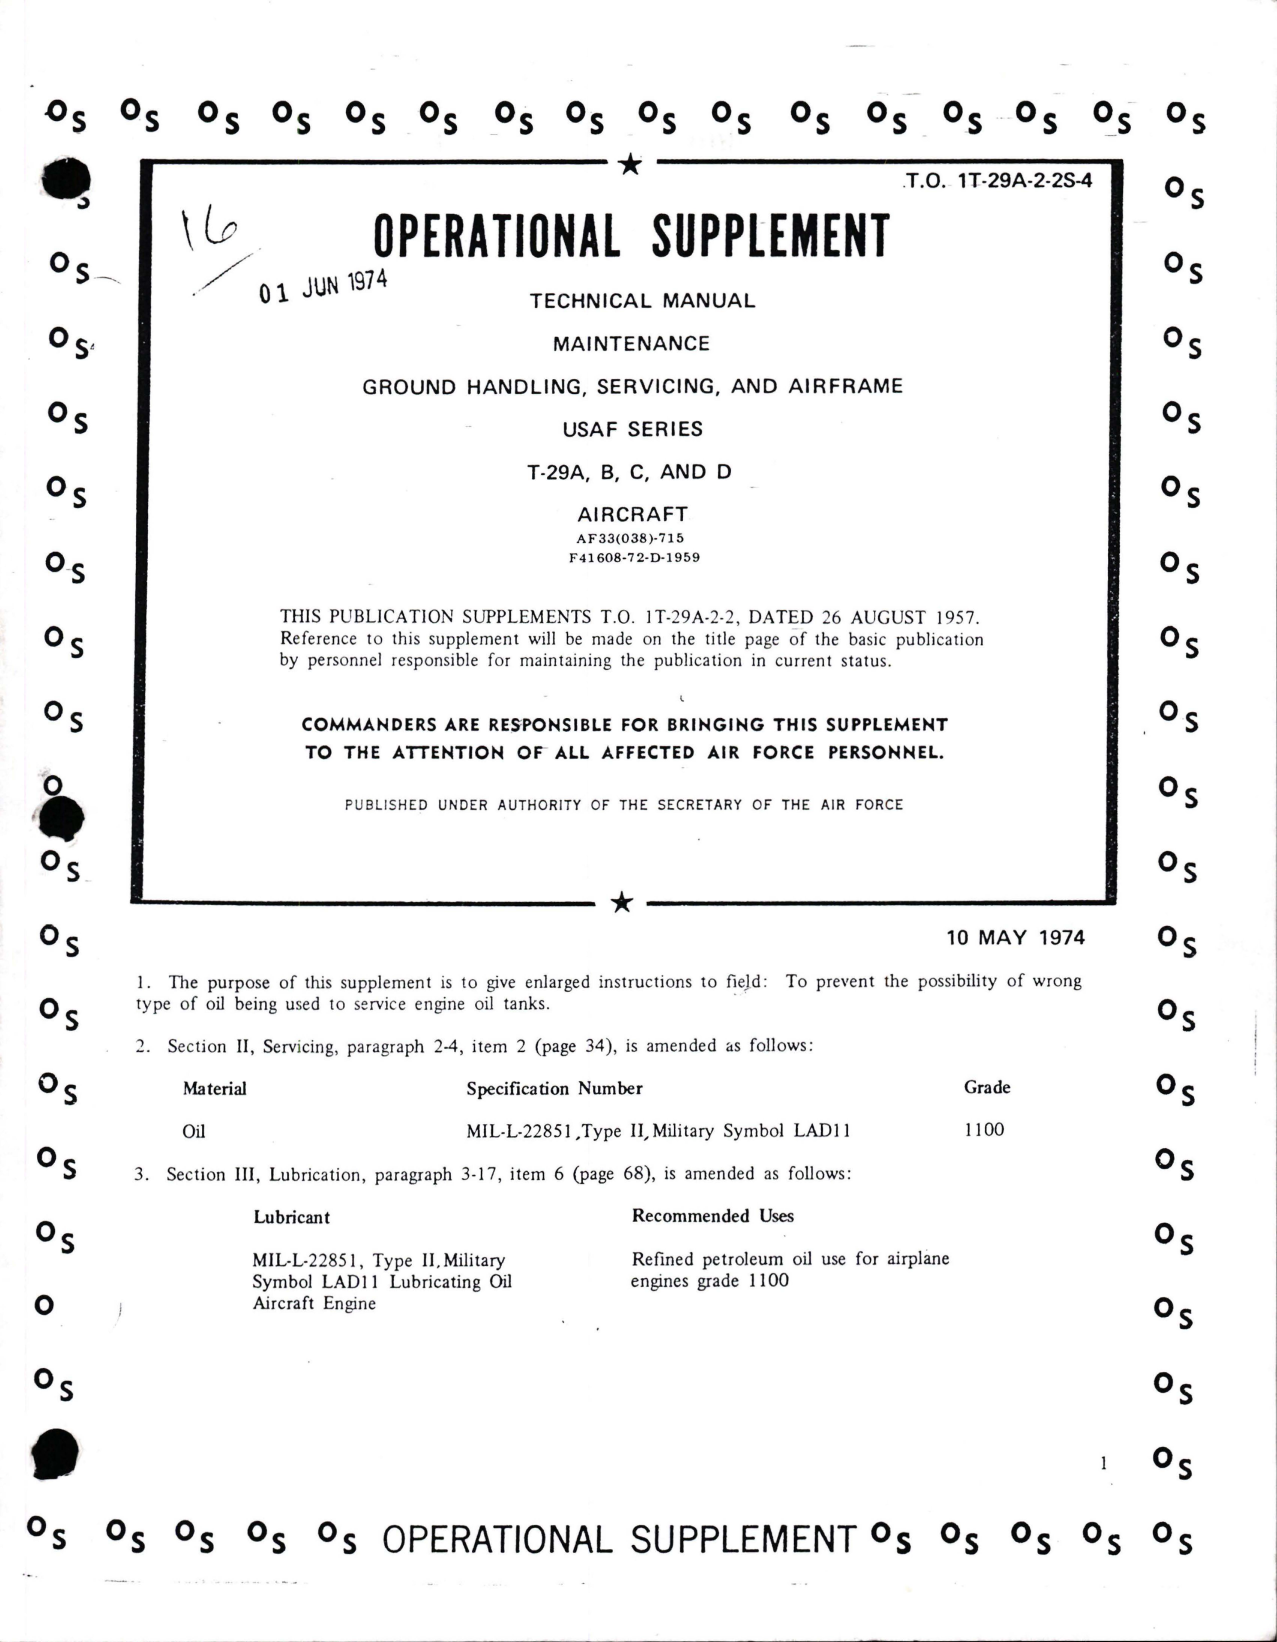 Sample page 1 from AirCorps Library document: Operational Supplement to Maintenance Manual for Ground Handling, Servicing and Airframe for T-29A, T-29B, T-29C, and T-29D